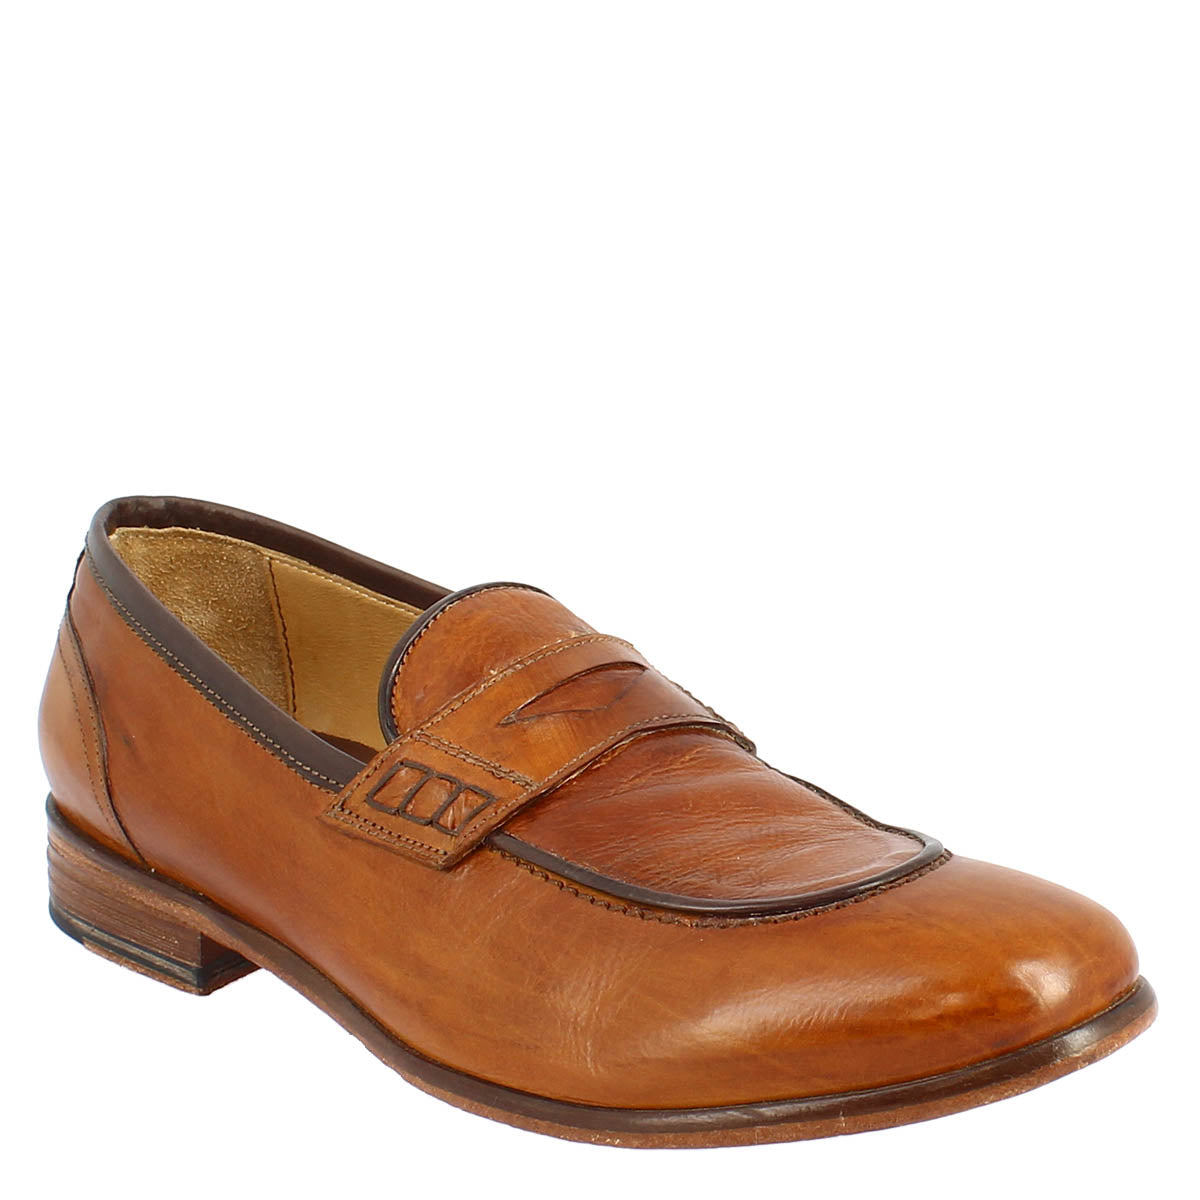 Classic loafers for men handmade in ocher brown <tc>LEATHER</tc> calfskin